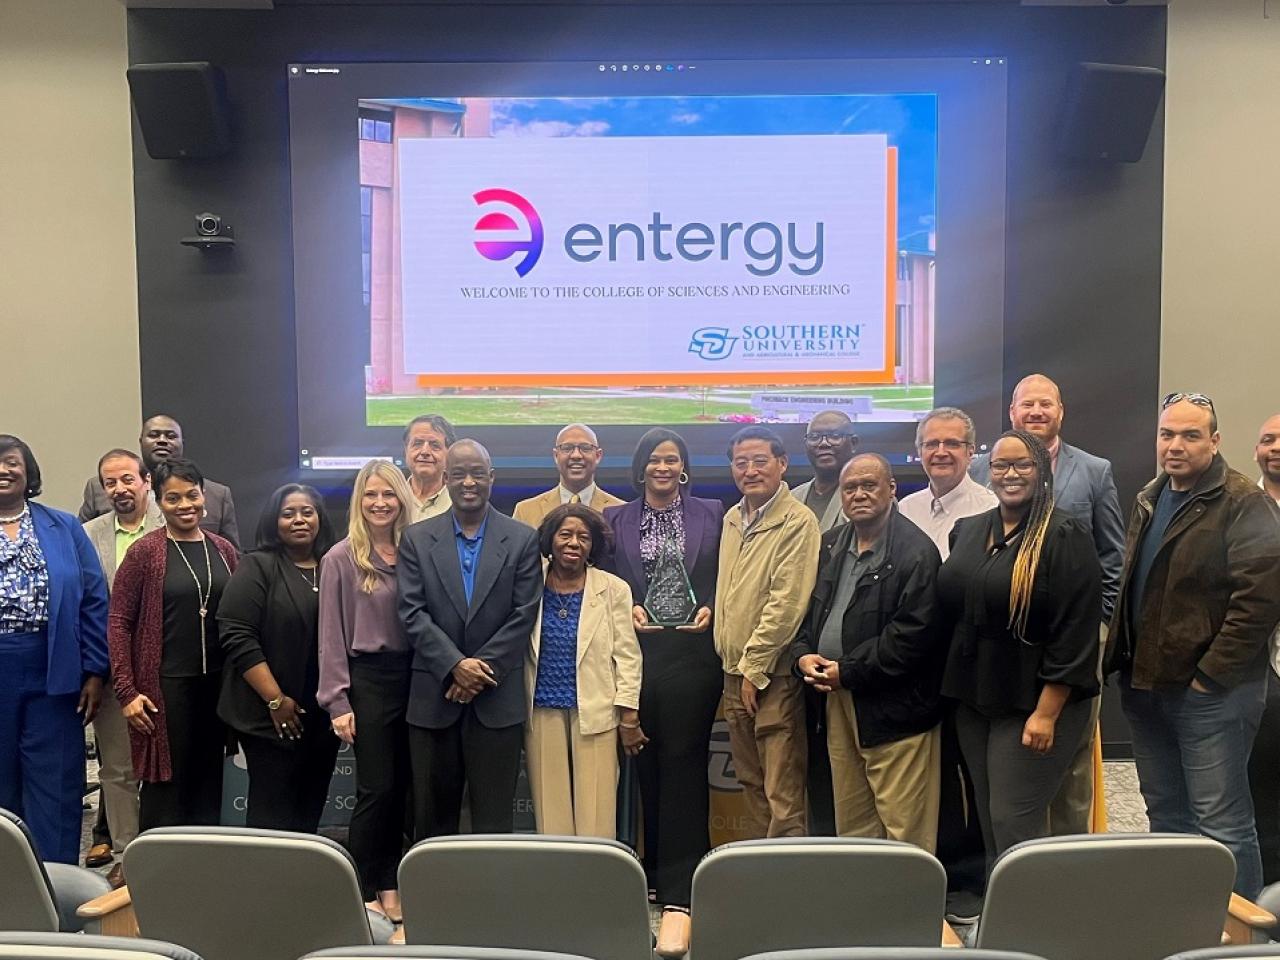 A group of people posed at the front of an auditorium. A digital display behind them with the entergy logo showing.